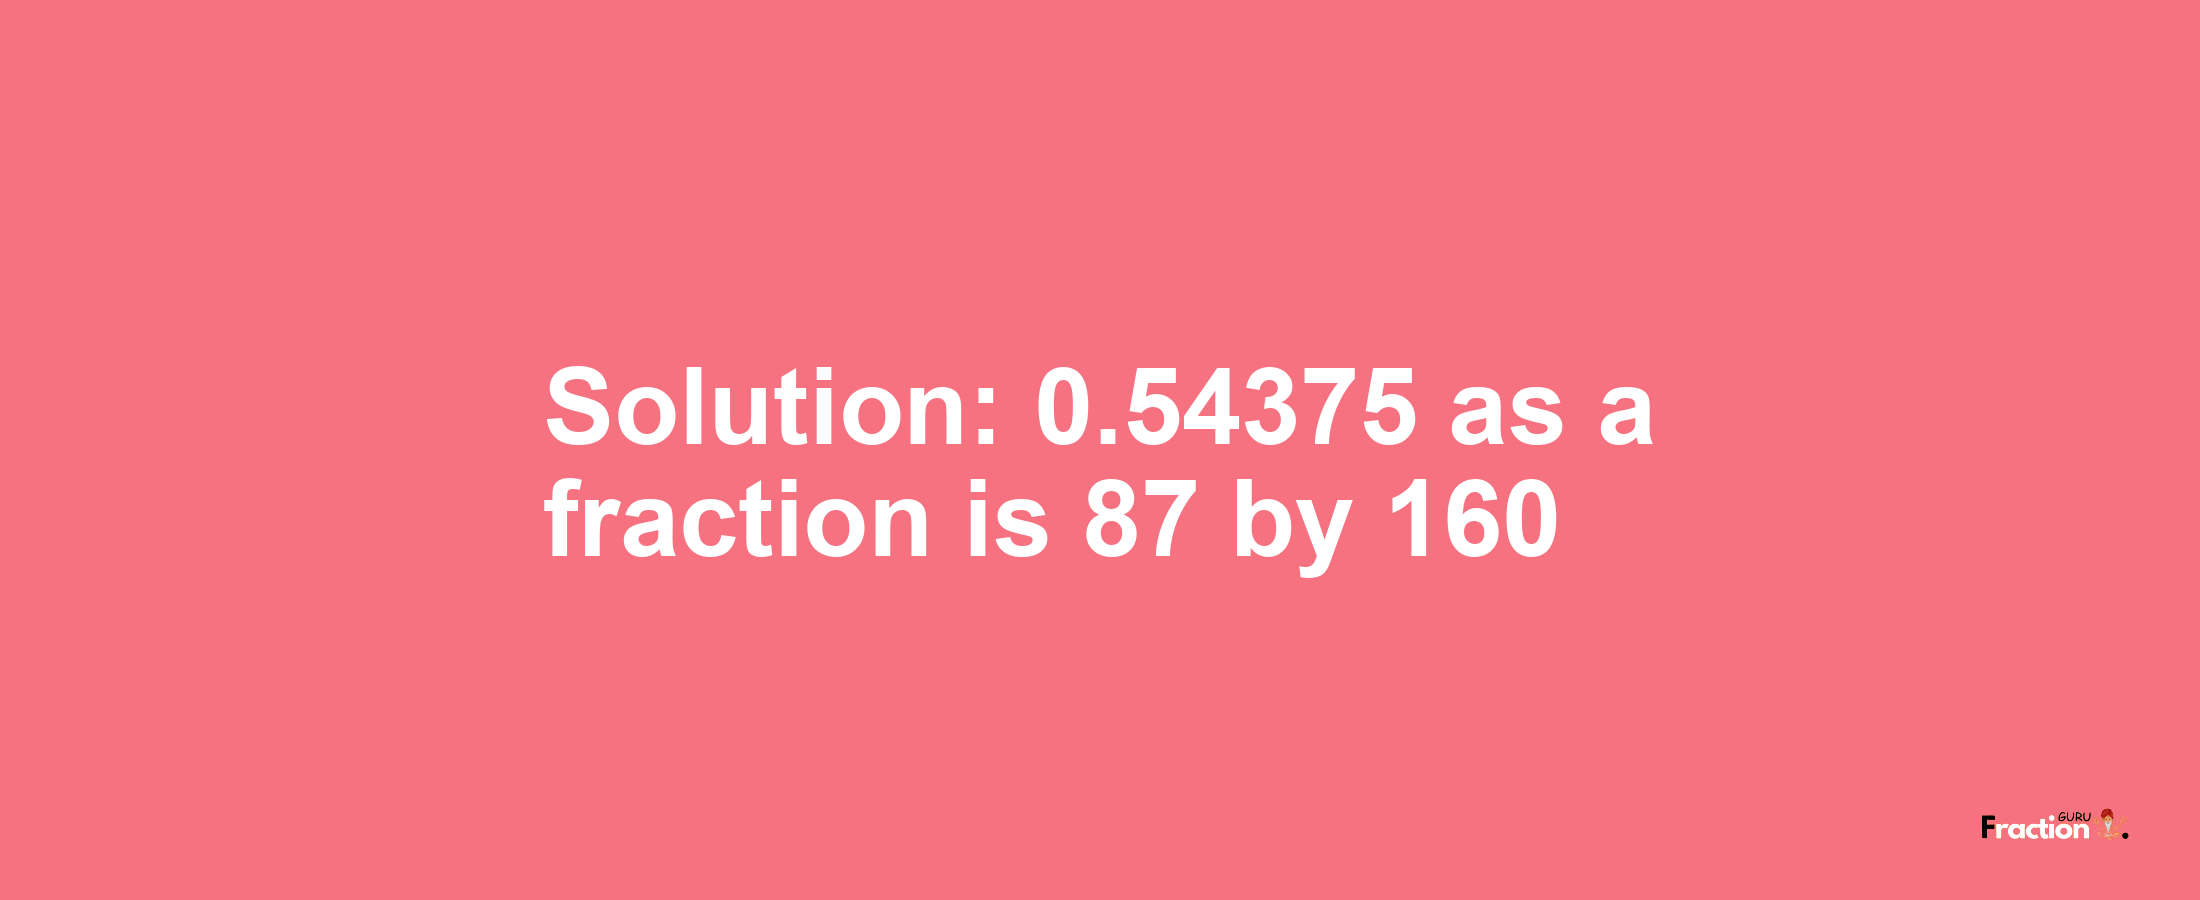 Solution:0.54375 as a fraction is 87/160